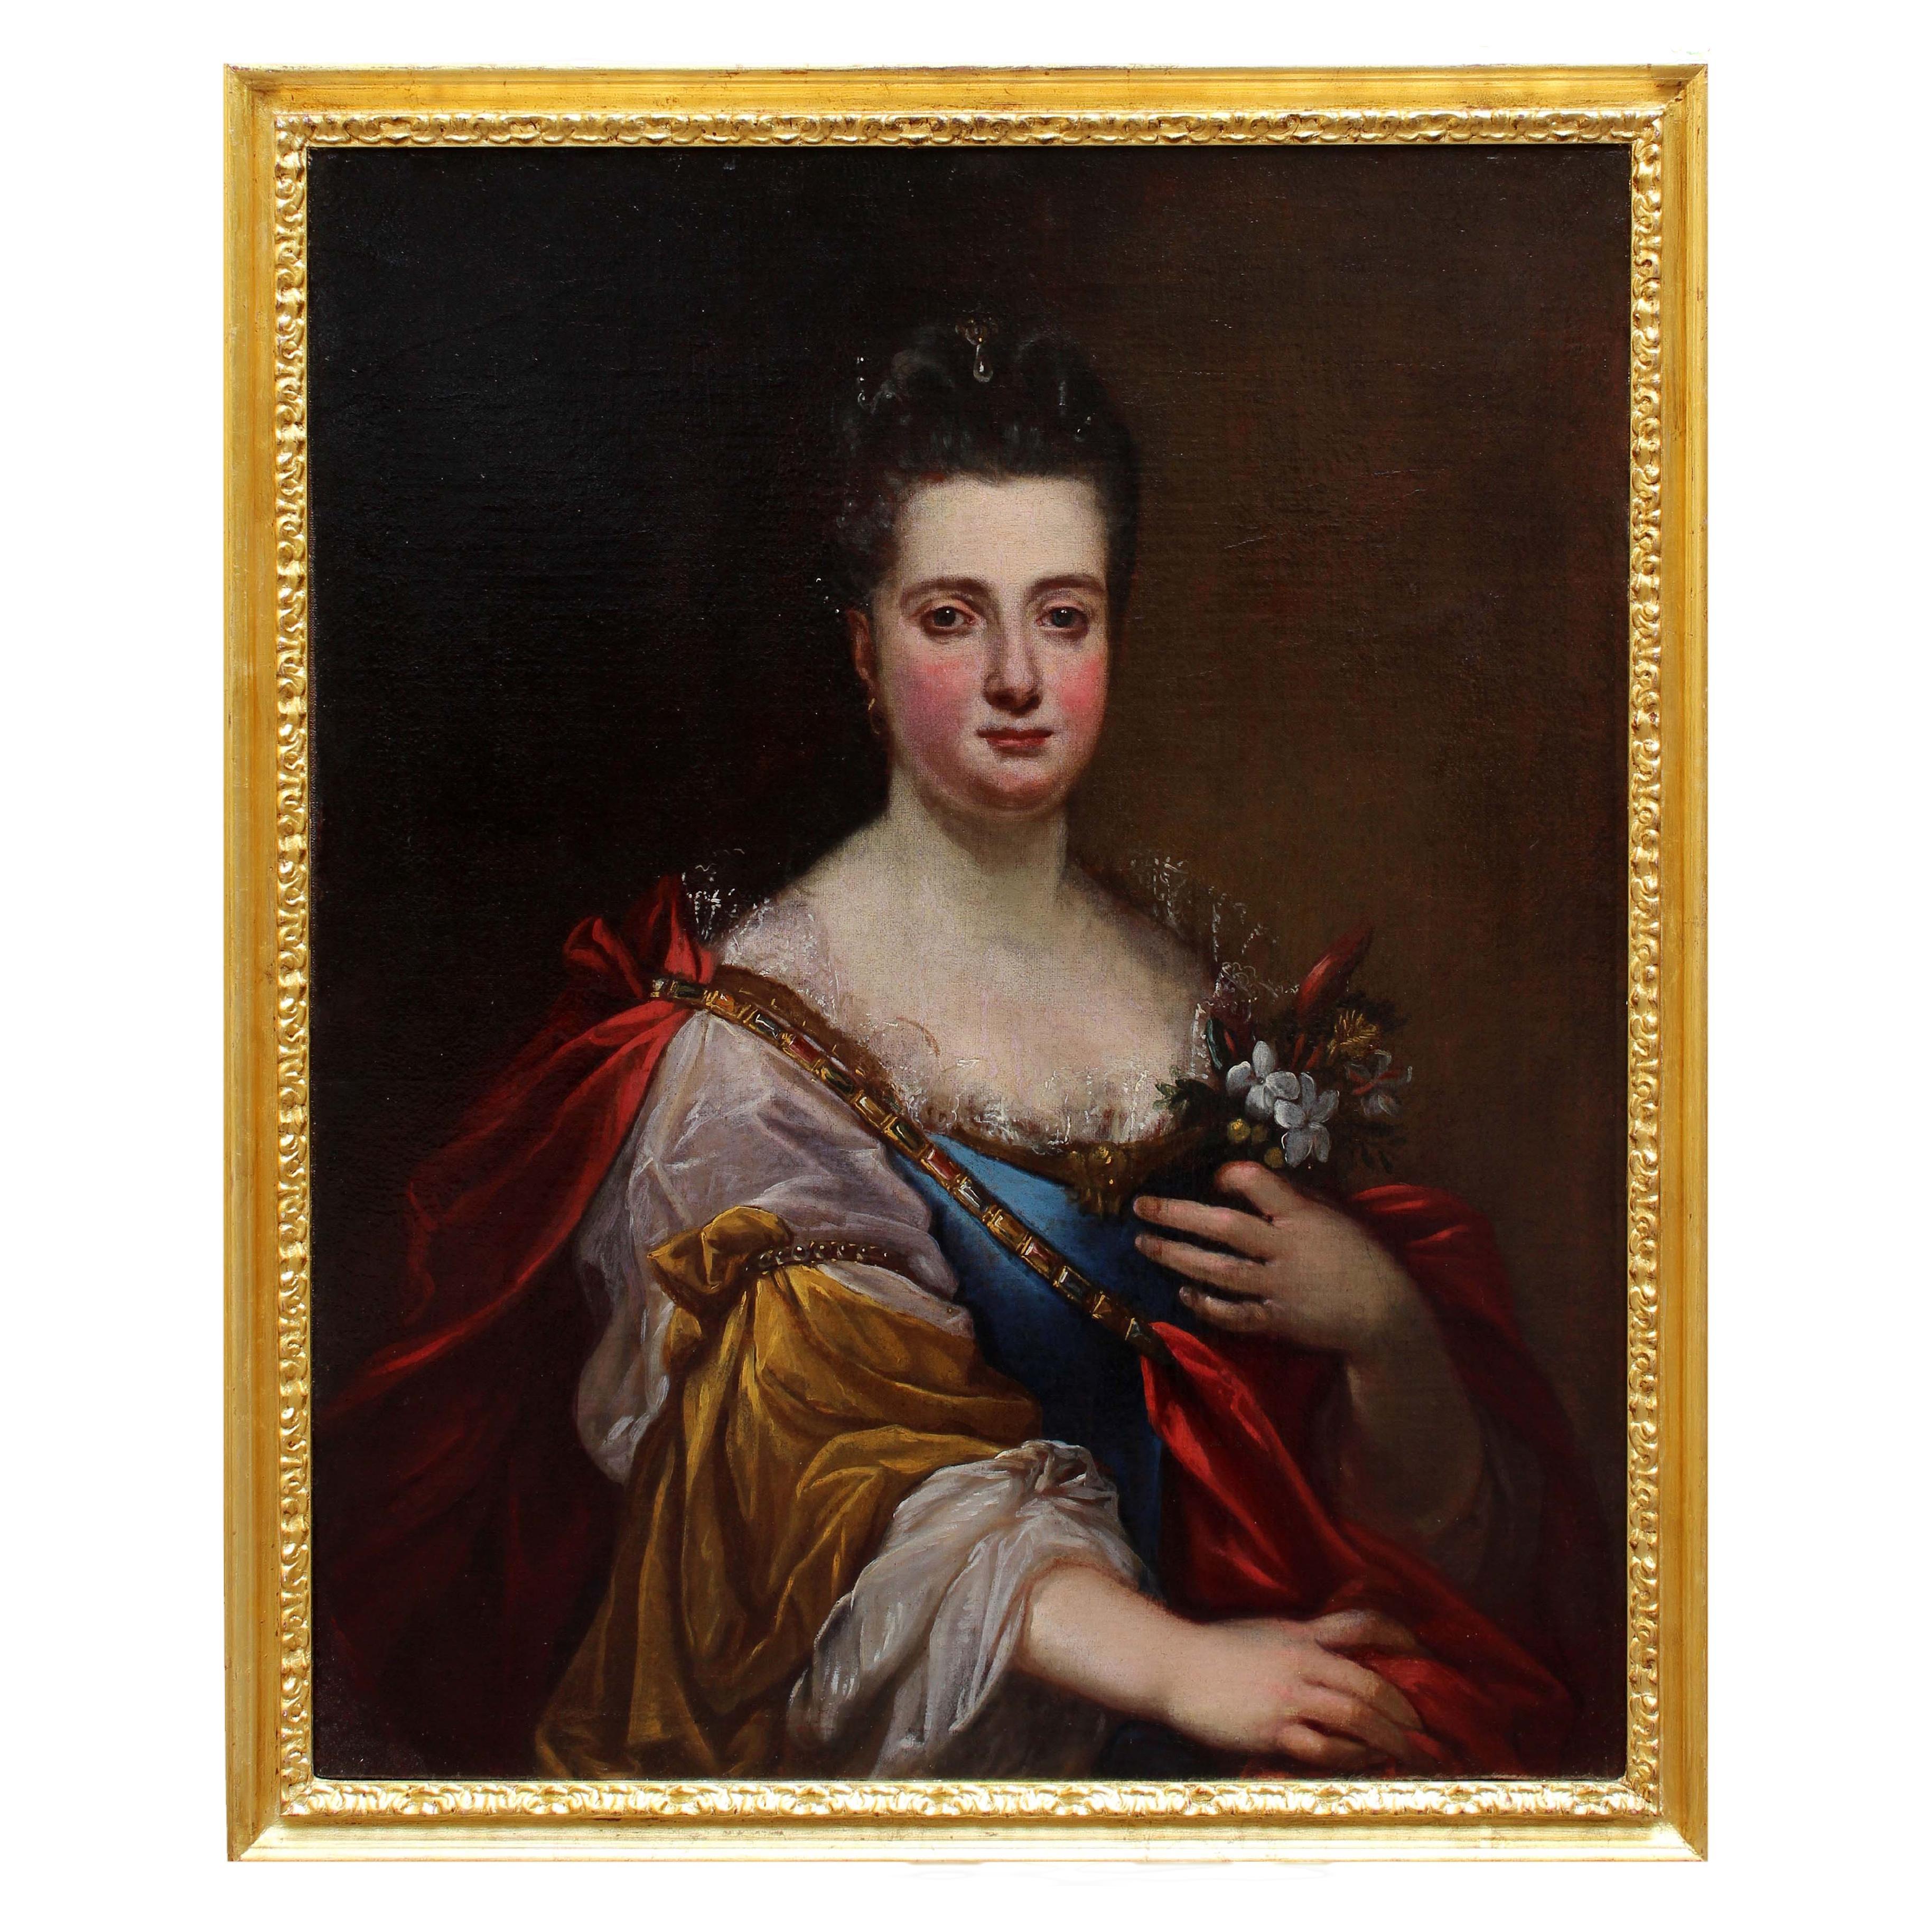 18th Century Portrait of a Lady Painting Oil on Canvas Attributed to Ceccarini